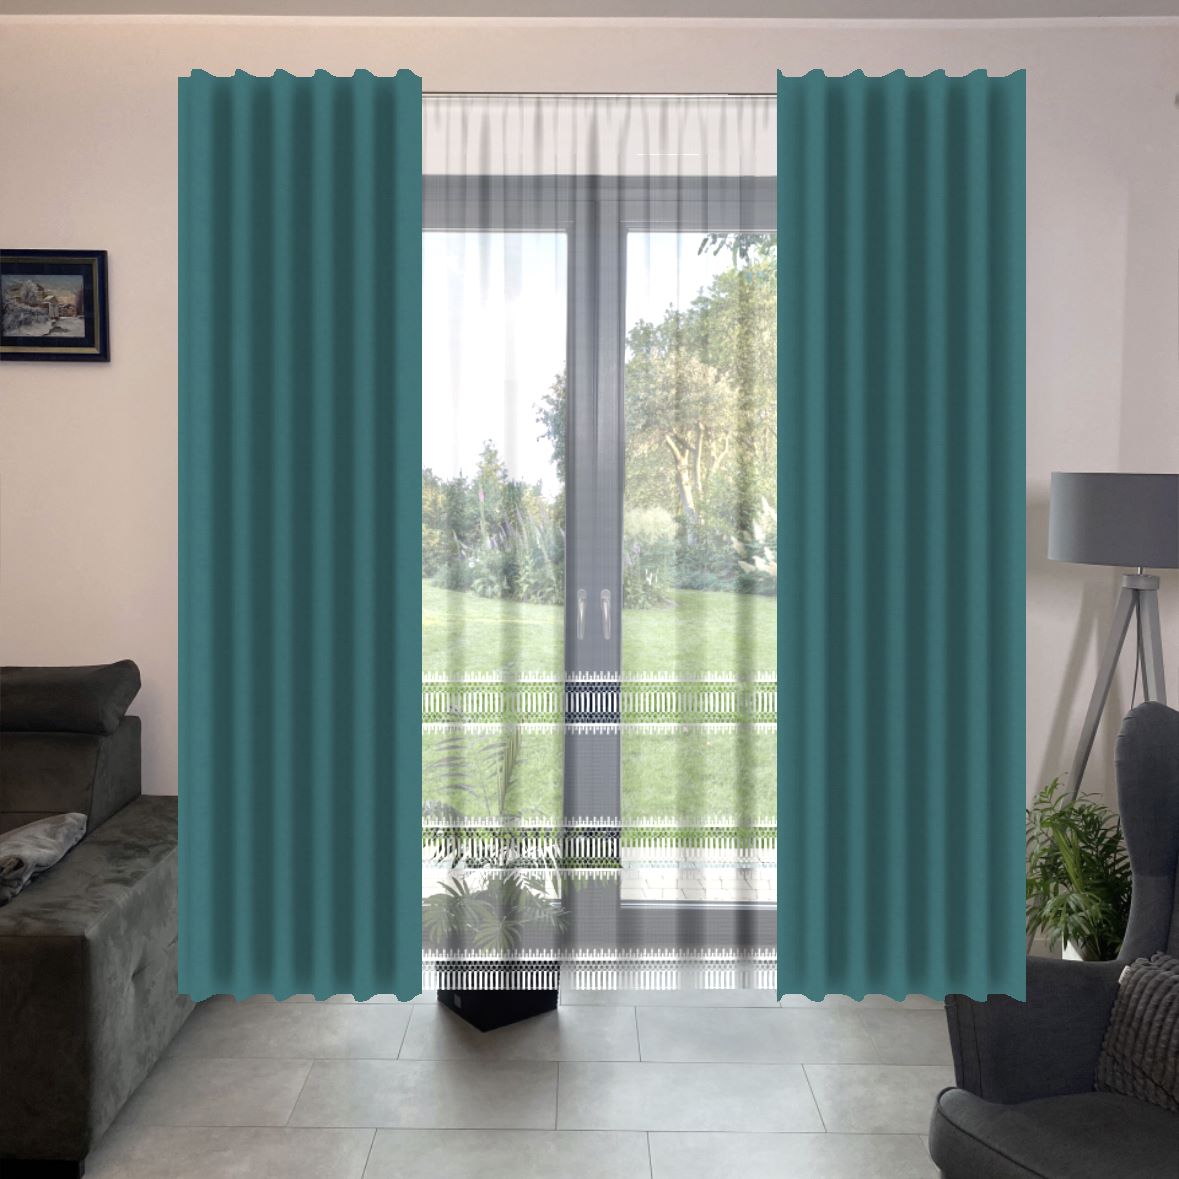 visualisation of a curtain against a photo of a window